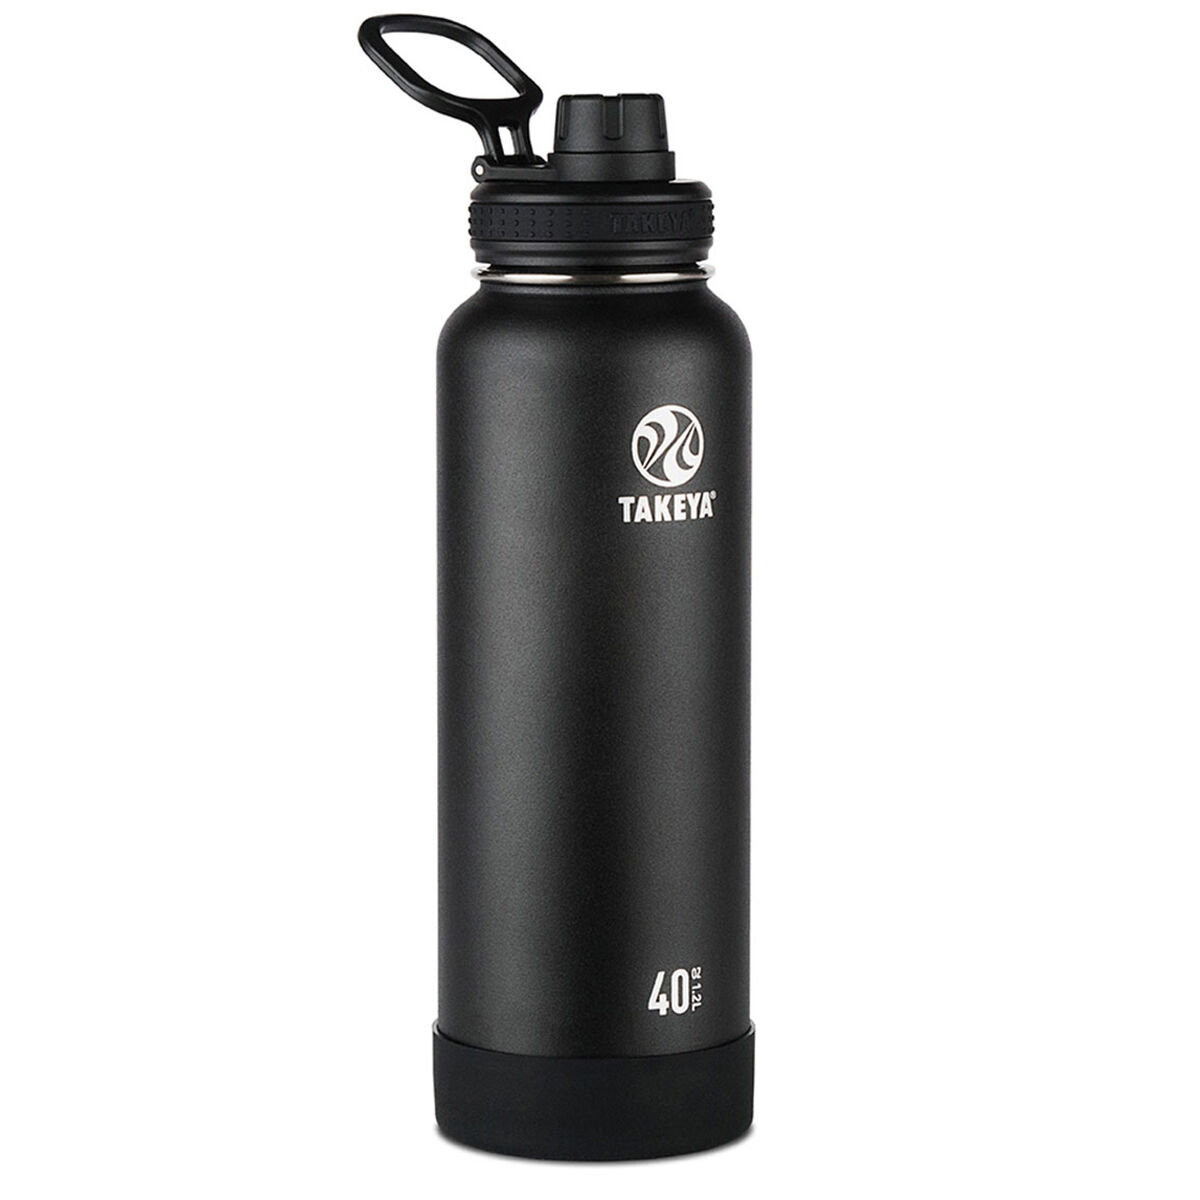 Takeya Actives Spout 1.2L Insulated Bottle | Rebel Sport